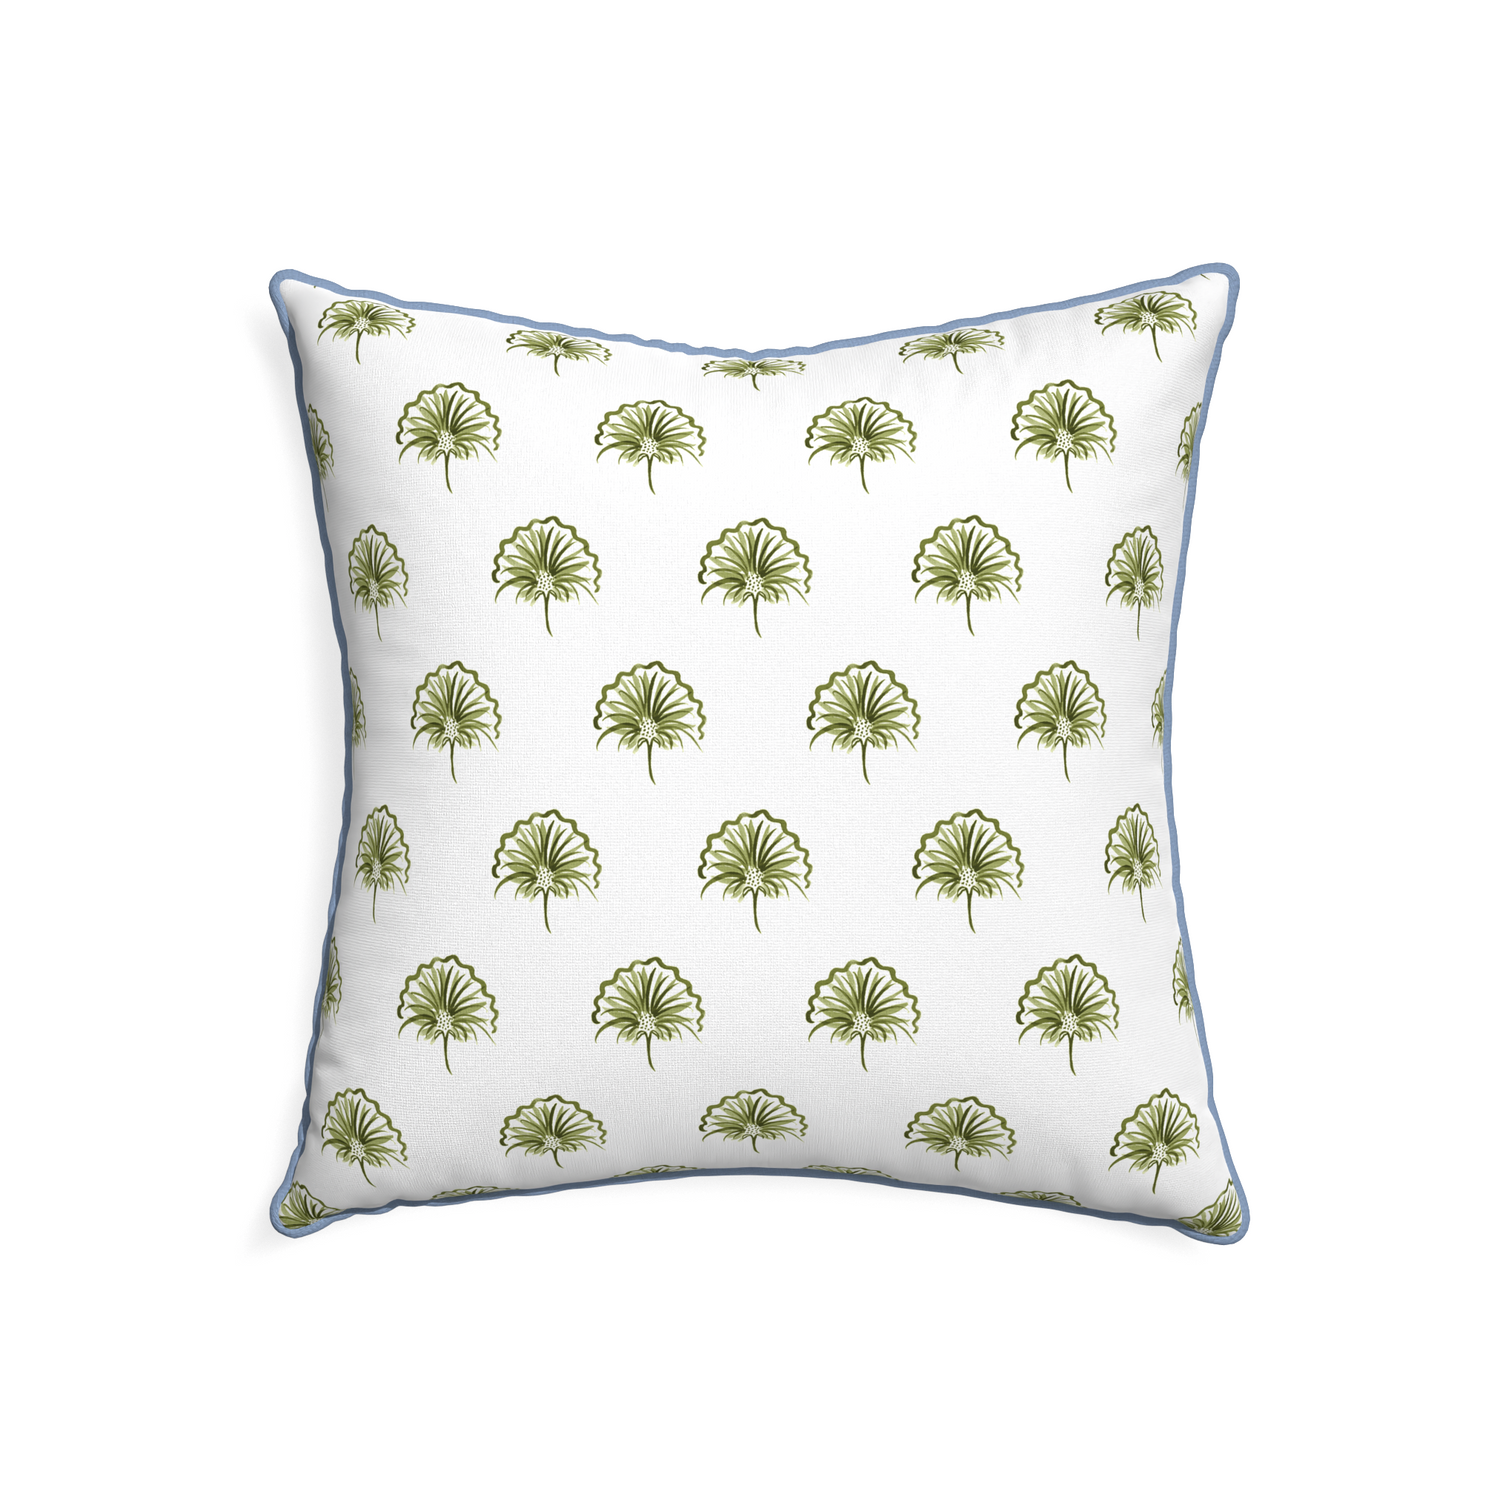 22-square penelope moss custom pillow with sky piping on white background